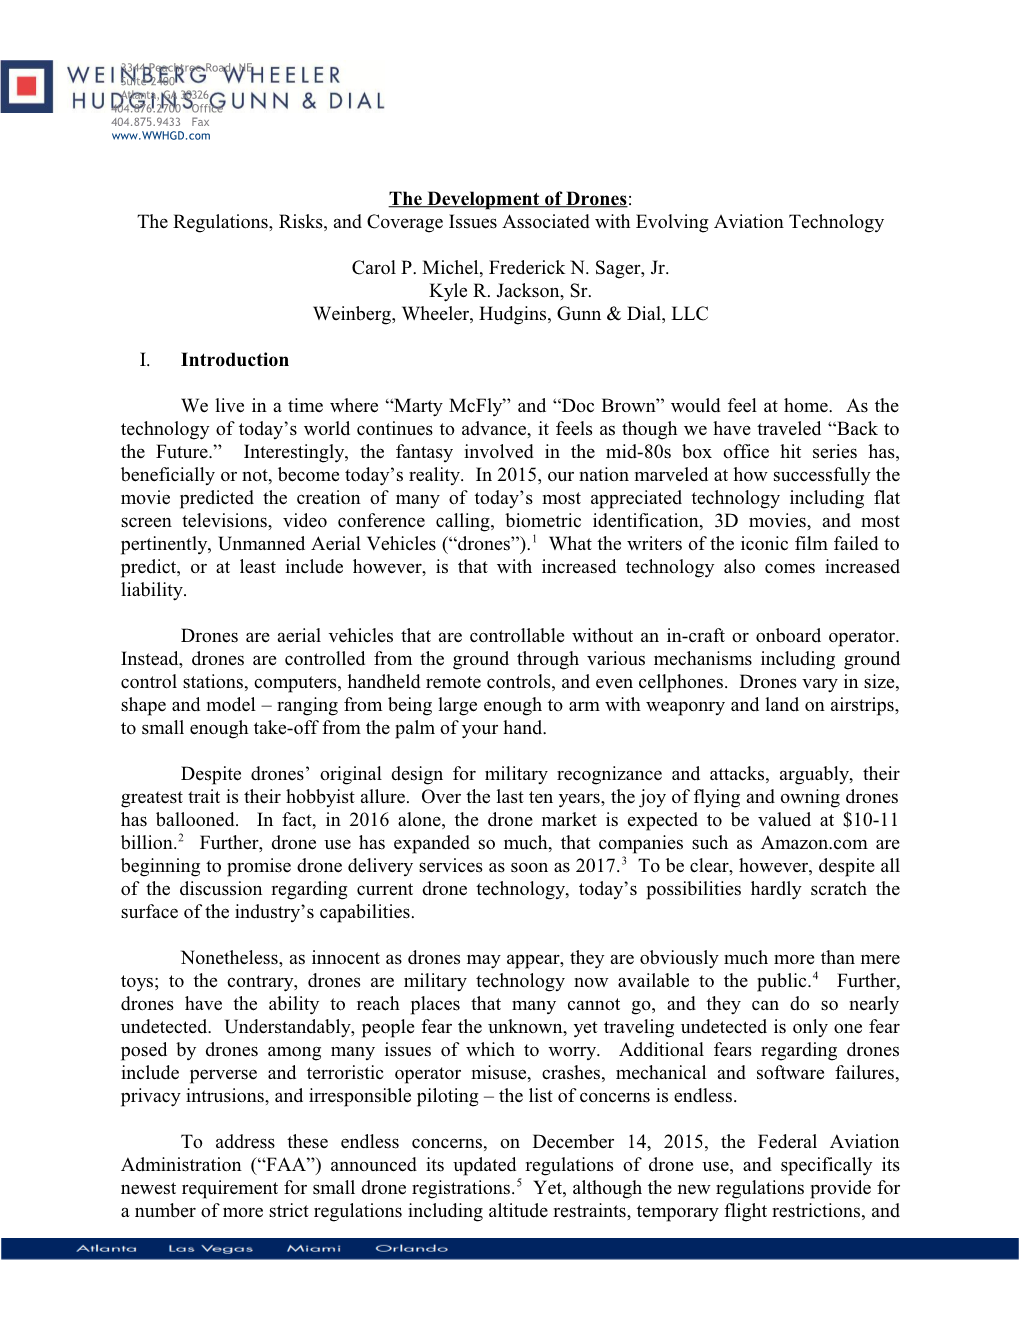 Drone Regulation Article (01982931;1)